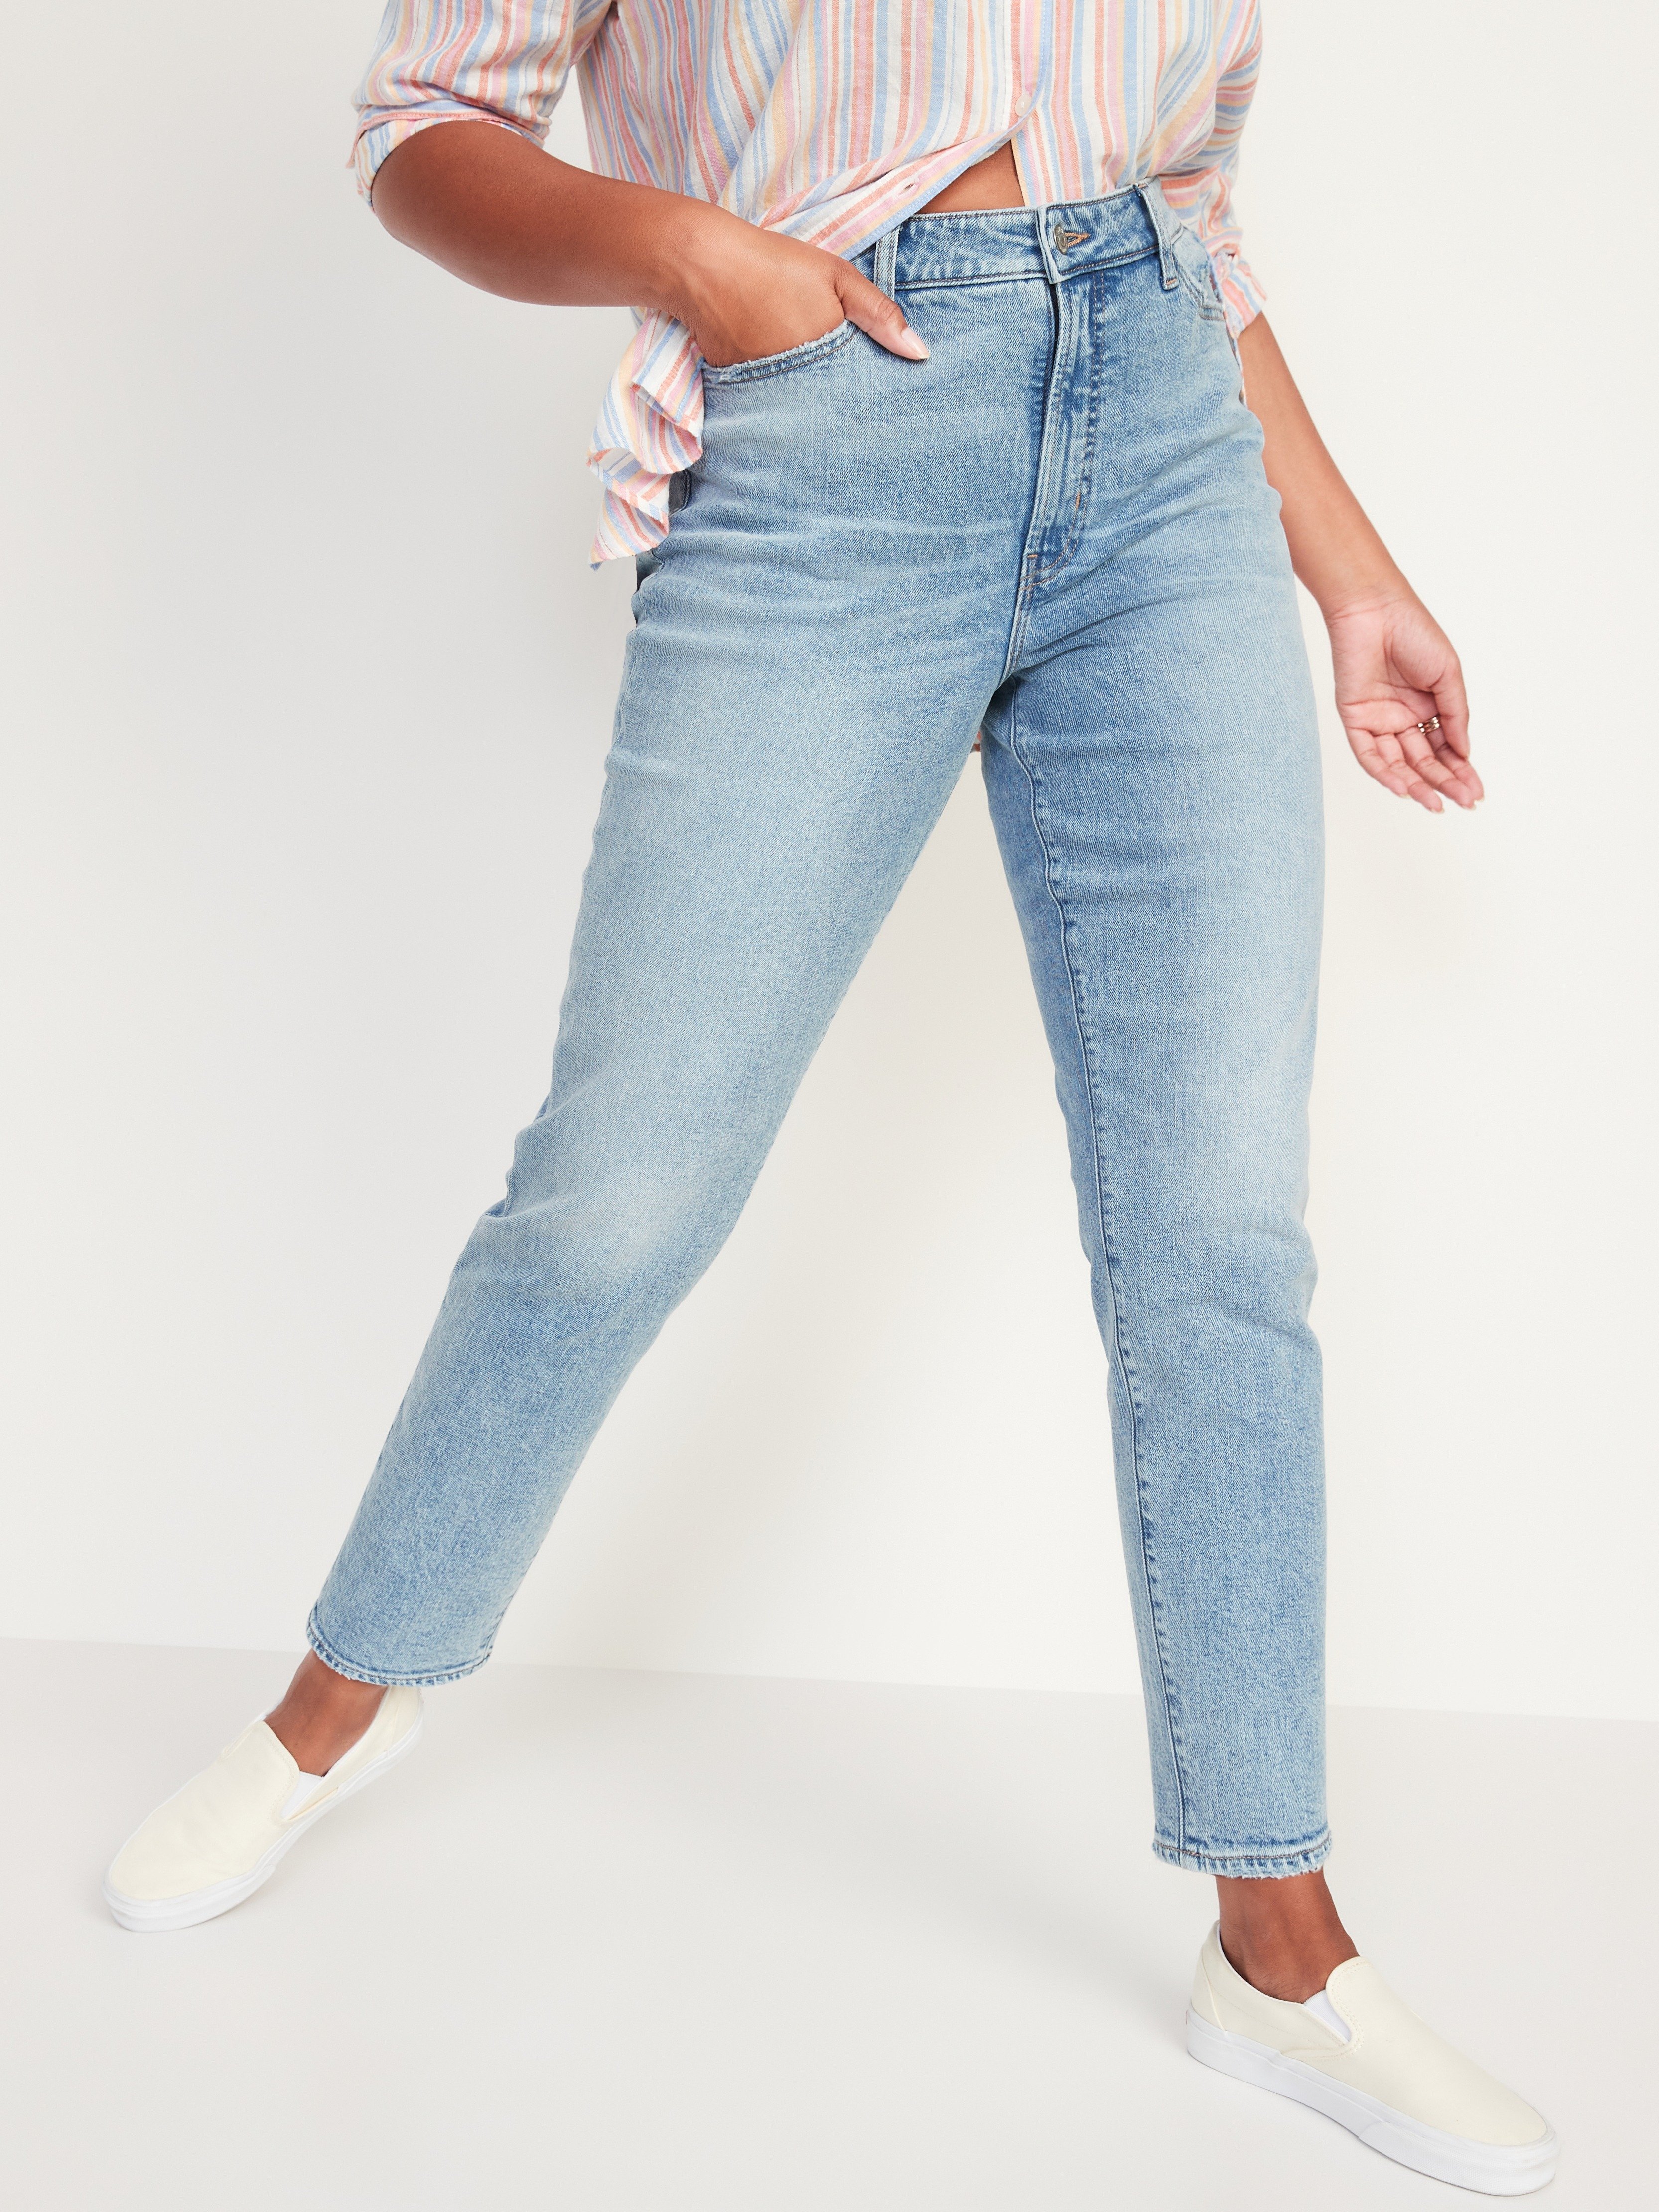 A pair of high-waisted straight jeans from Old Navy